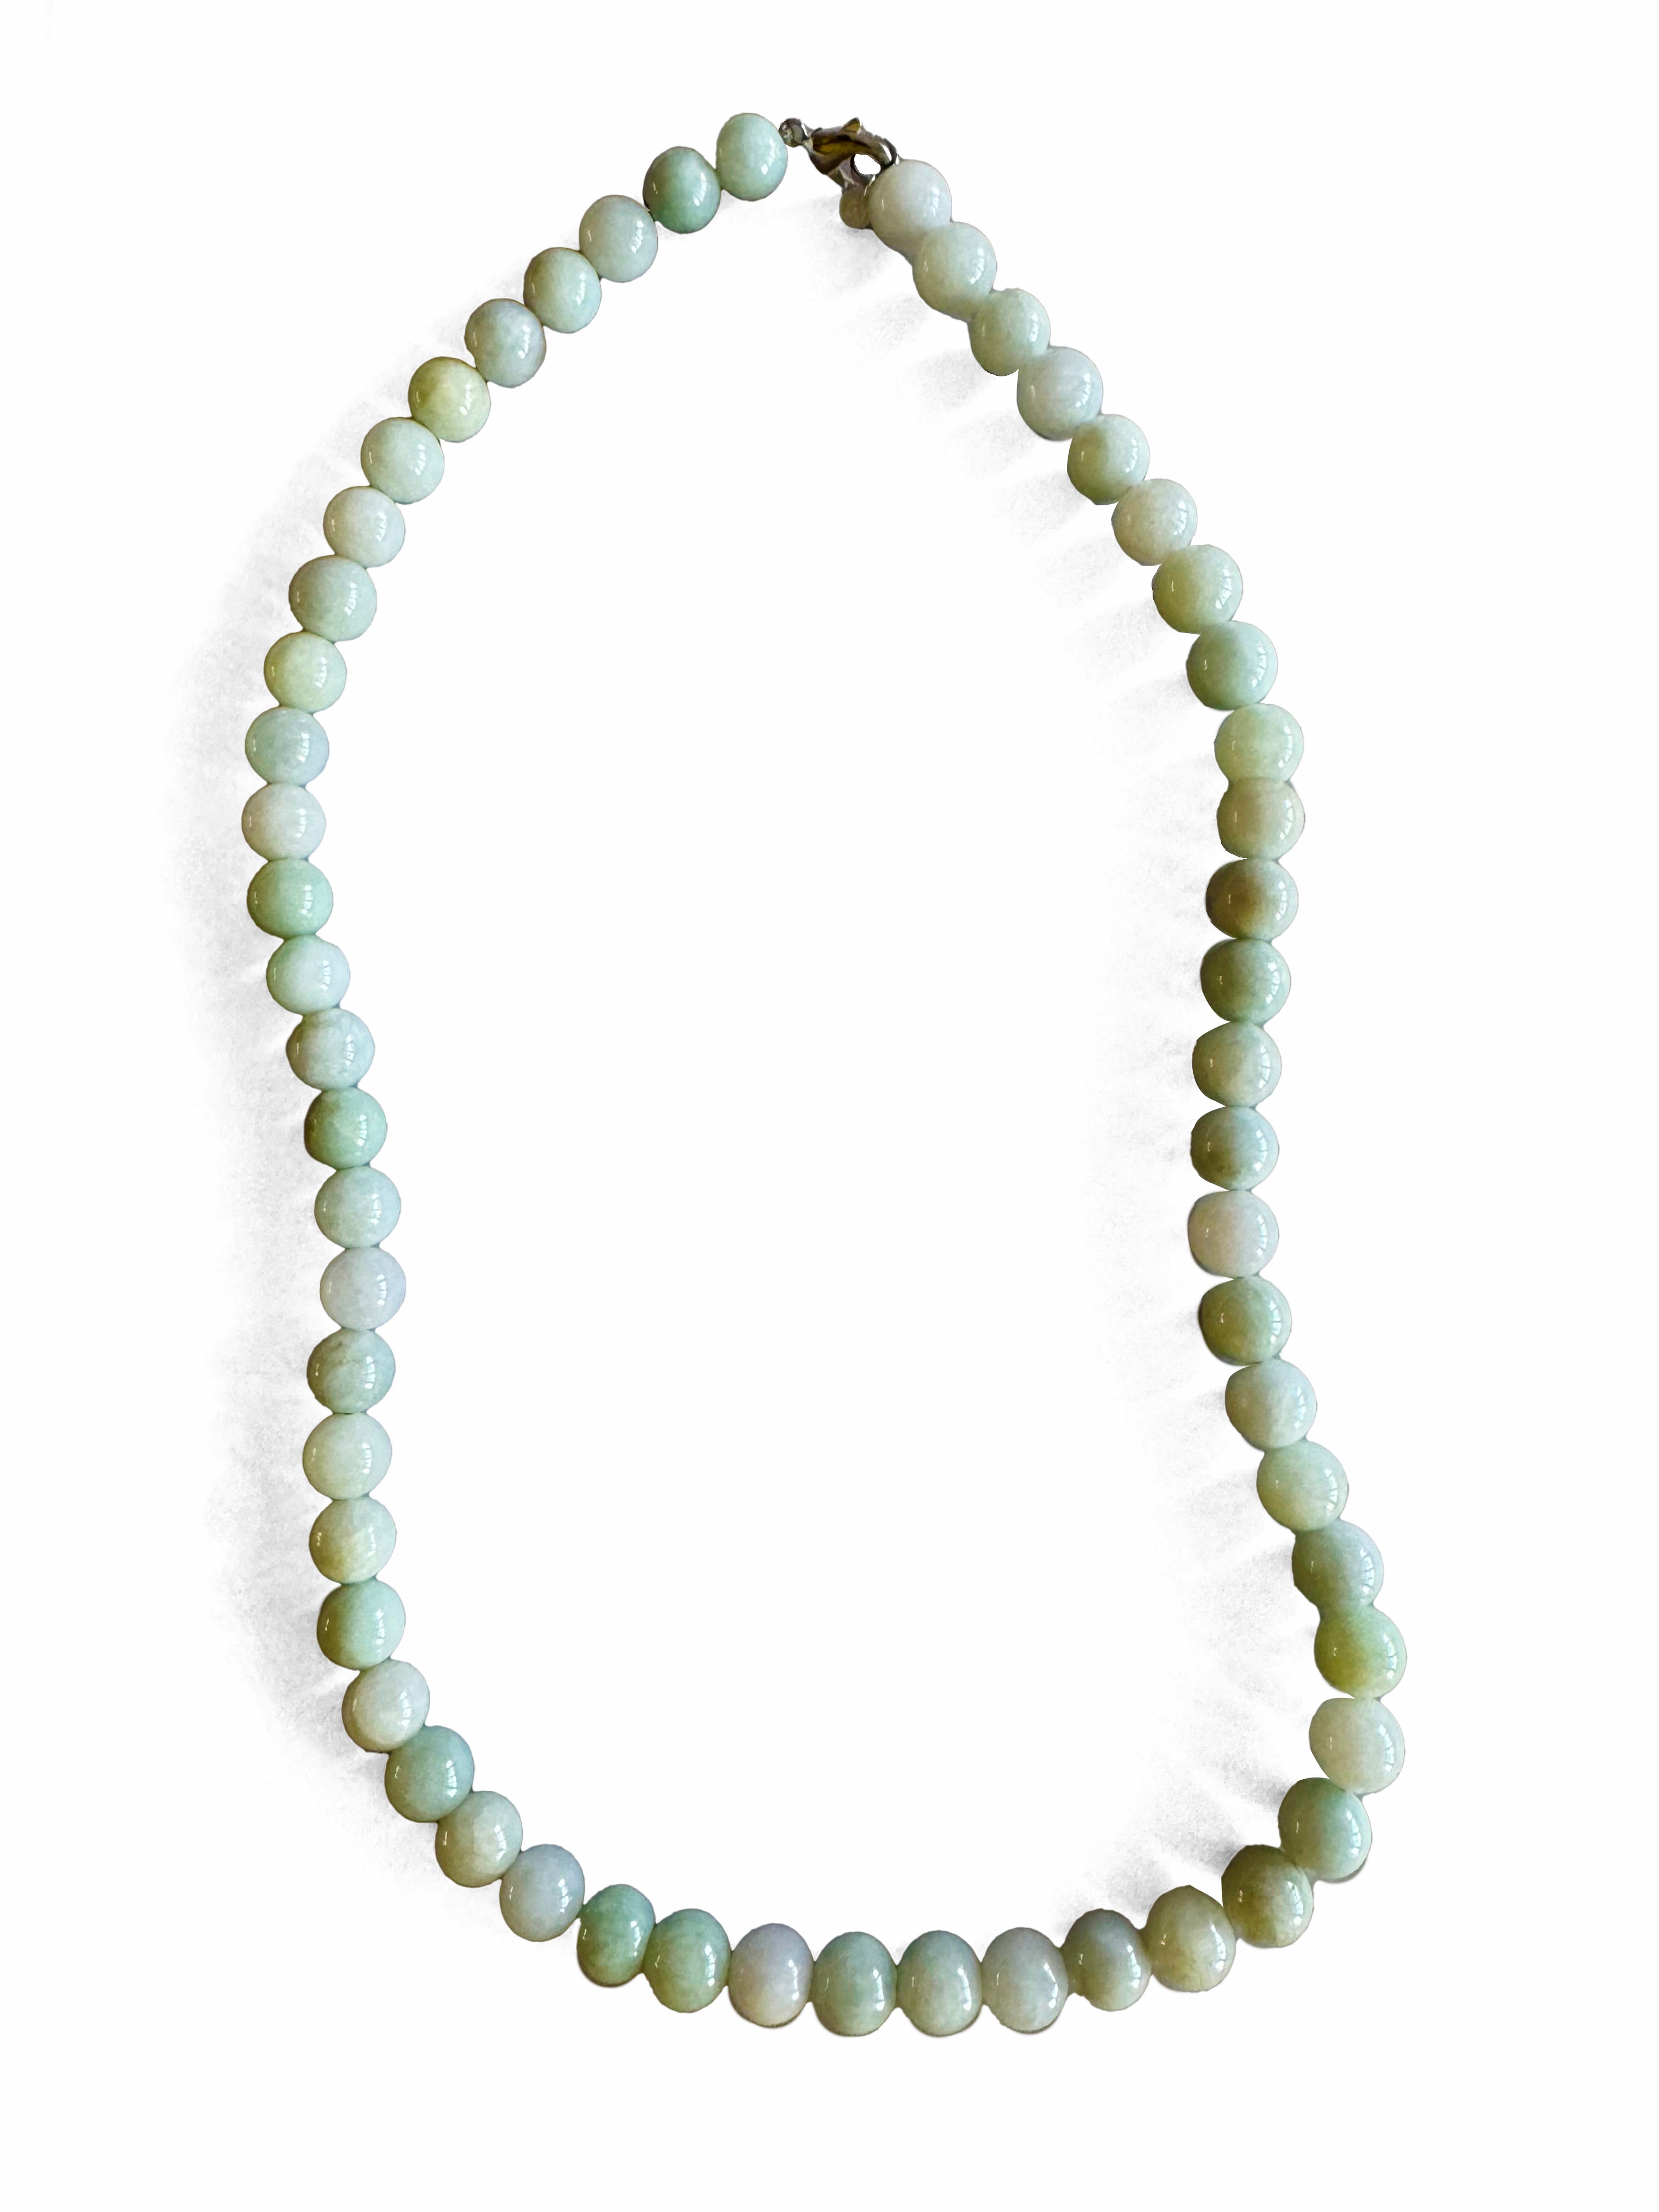 MING'S 14KYG 5-5.5mm CULTURED PEARL DOUBLE STRAND NECKLACE WITH CARVED  GREEN JADE CLASP 16/17 INCH LENGTH - Hawaii Estate & Jewelry Buyers